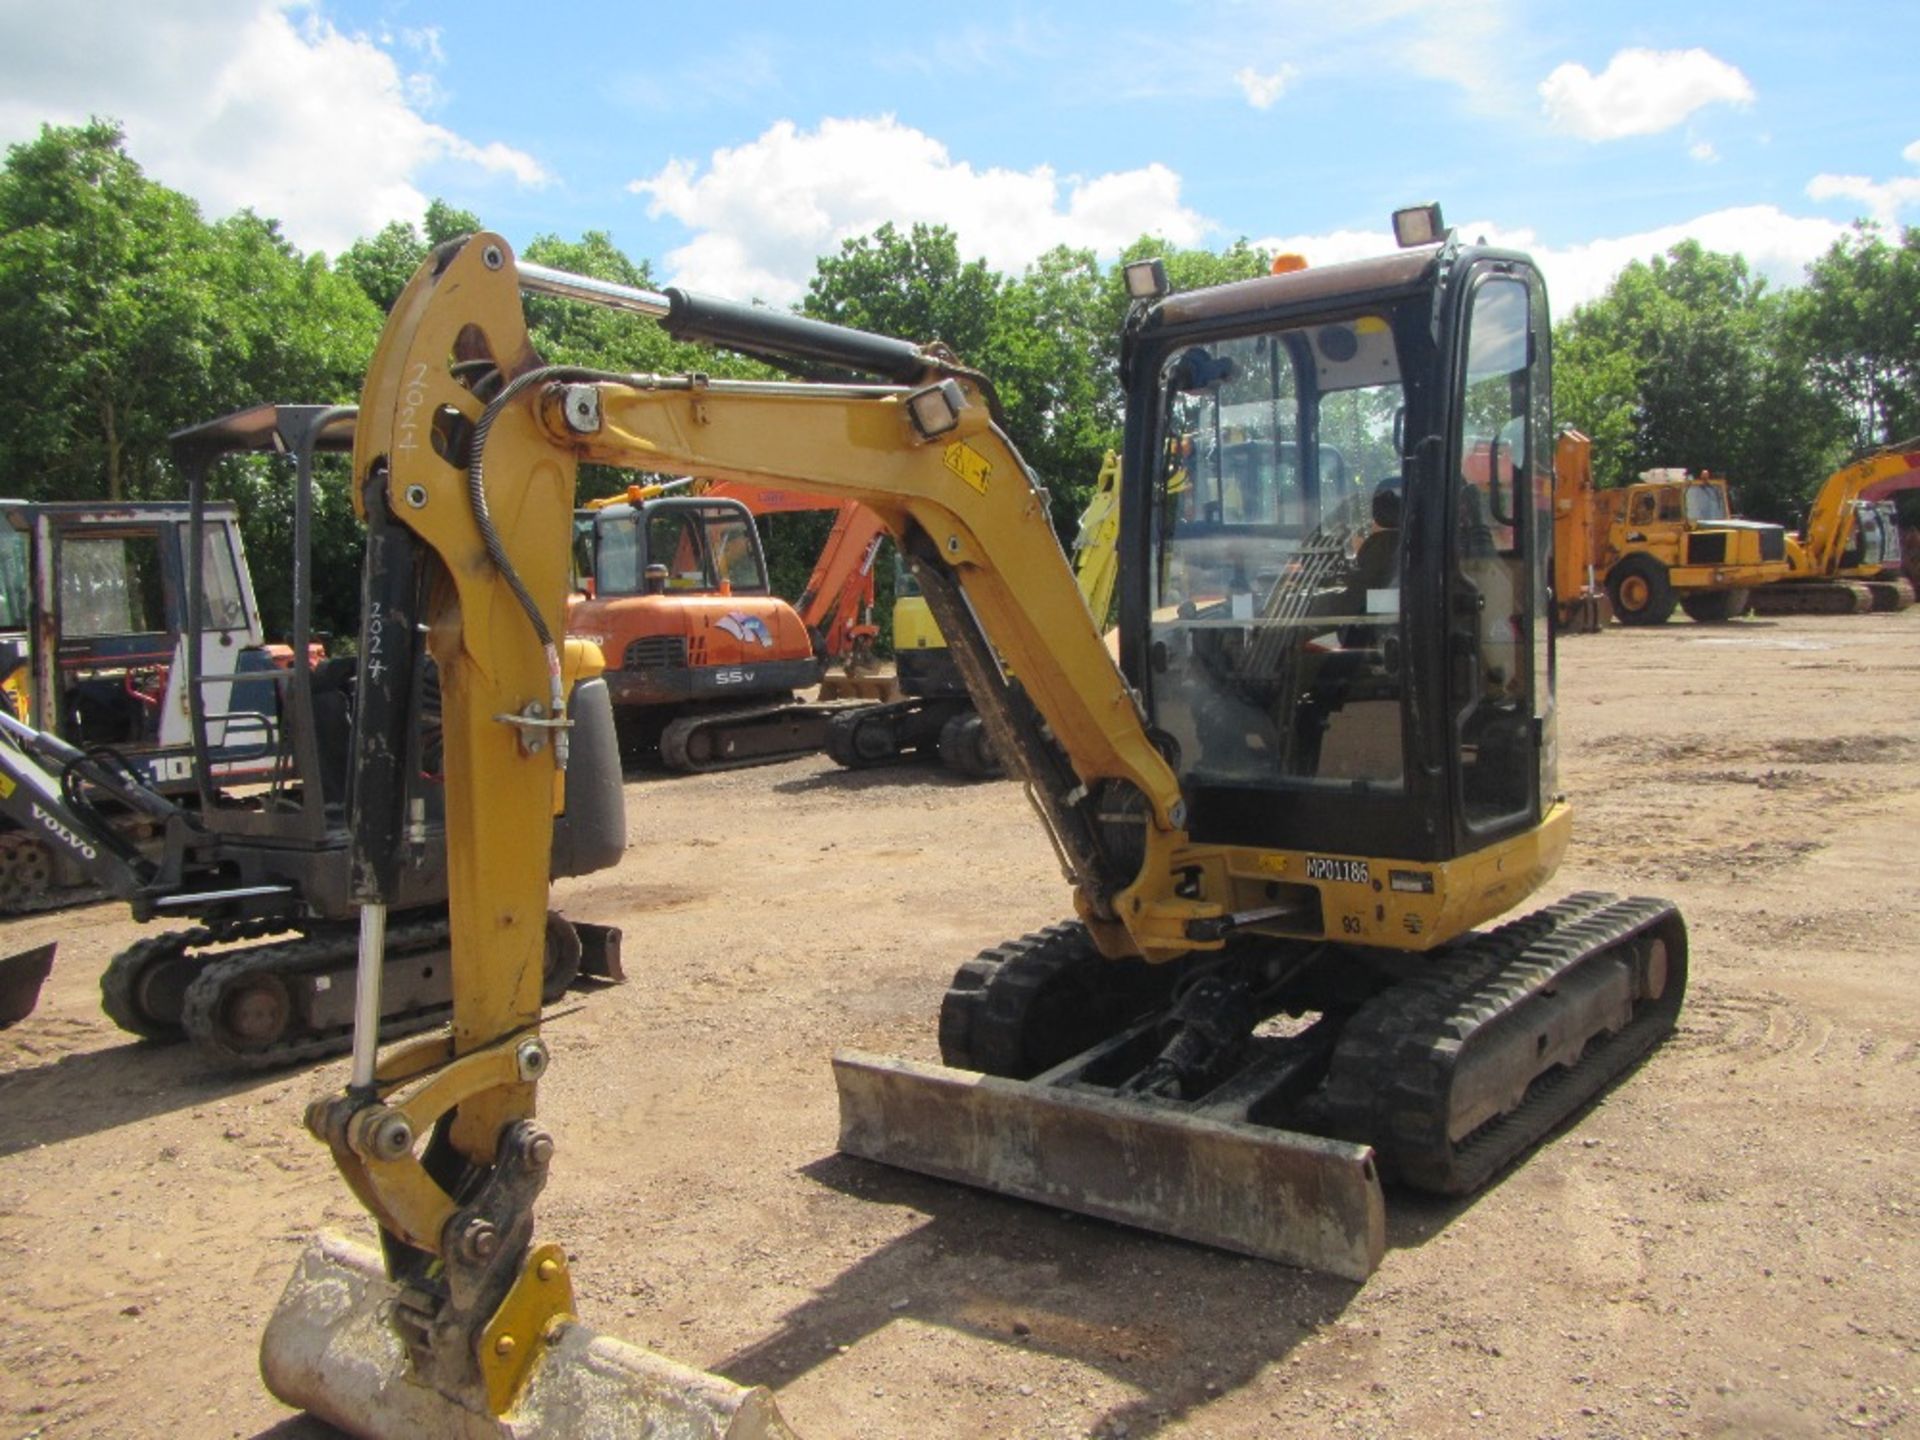 2014 Caterpillar 302.7D Excavator c/w rubber tracks, full cab, manual hitch, 2 buckets, 1 owner,